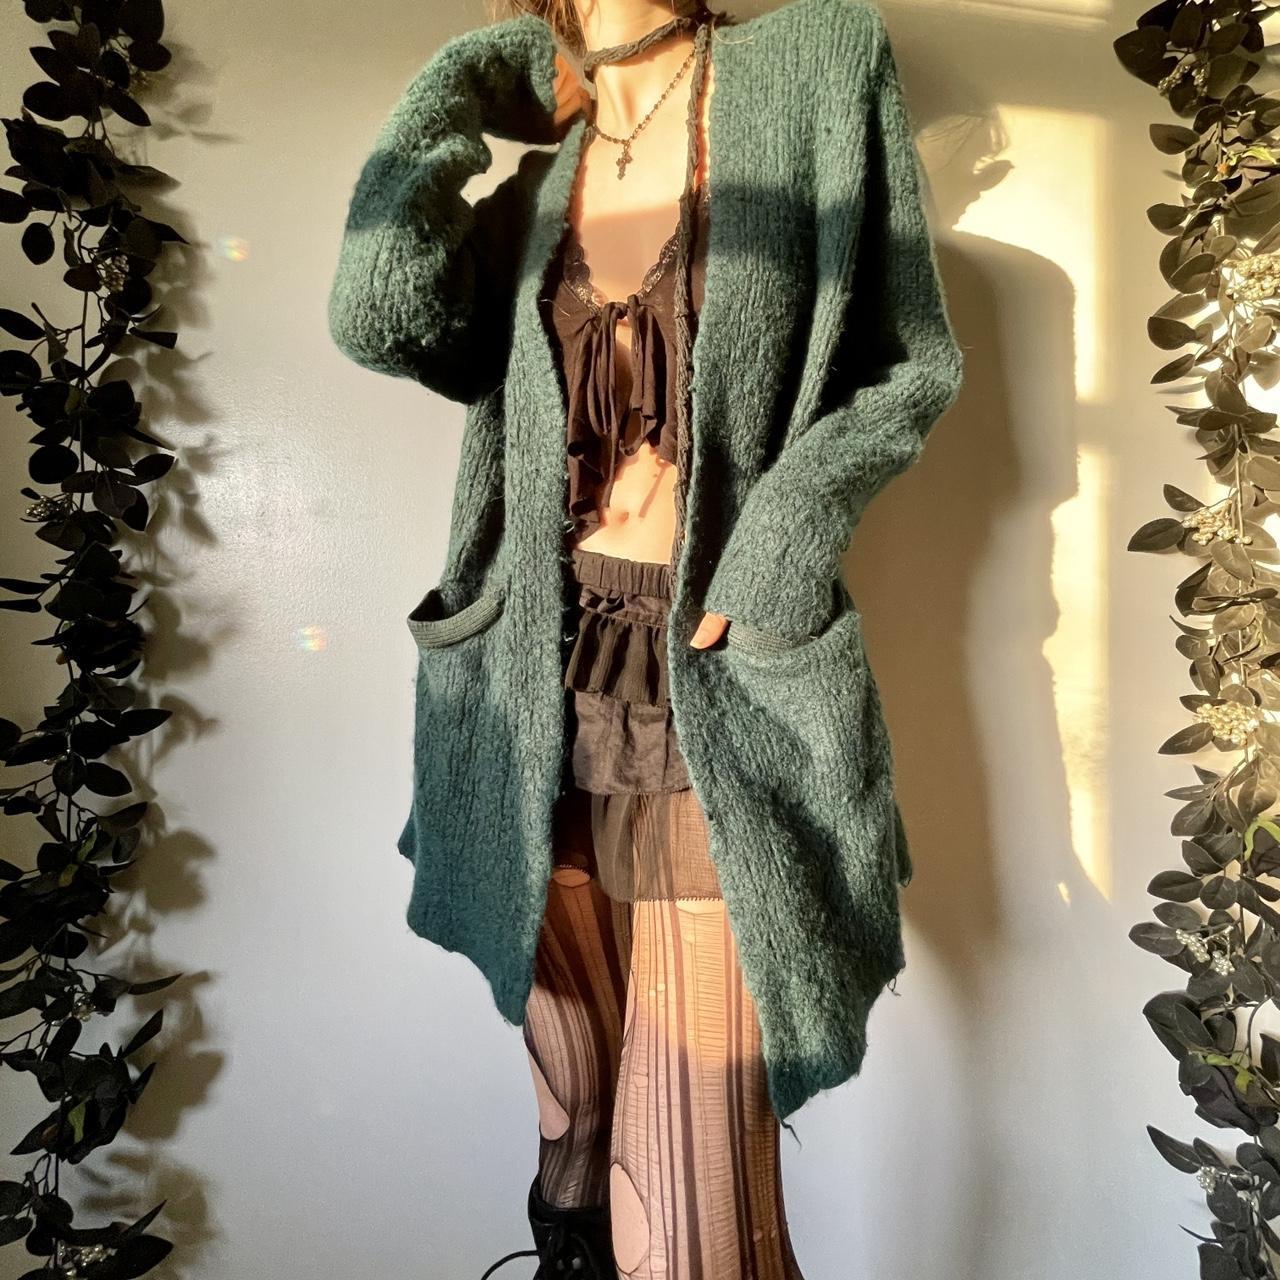 Free People Women's Green and Blue Cardigan